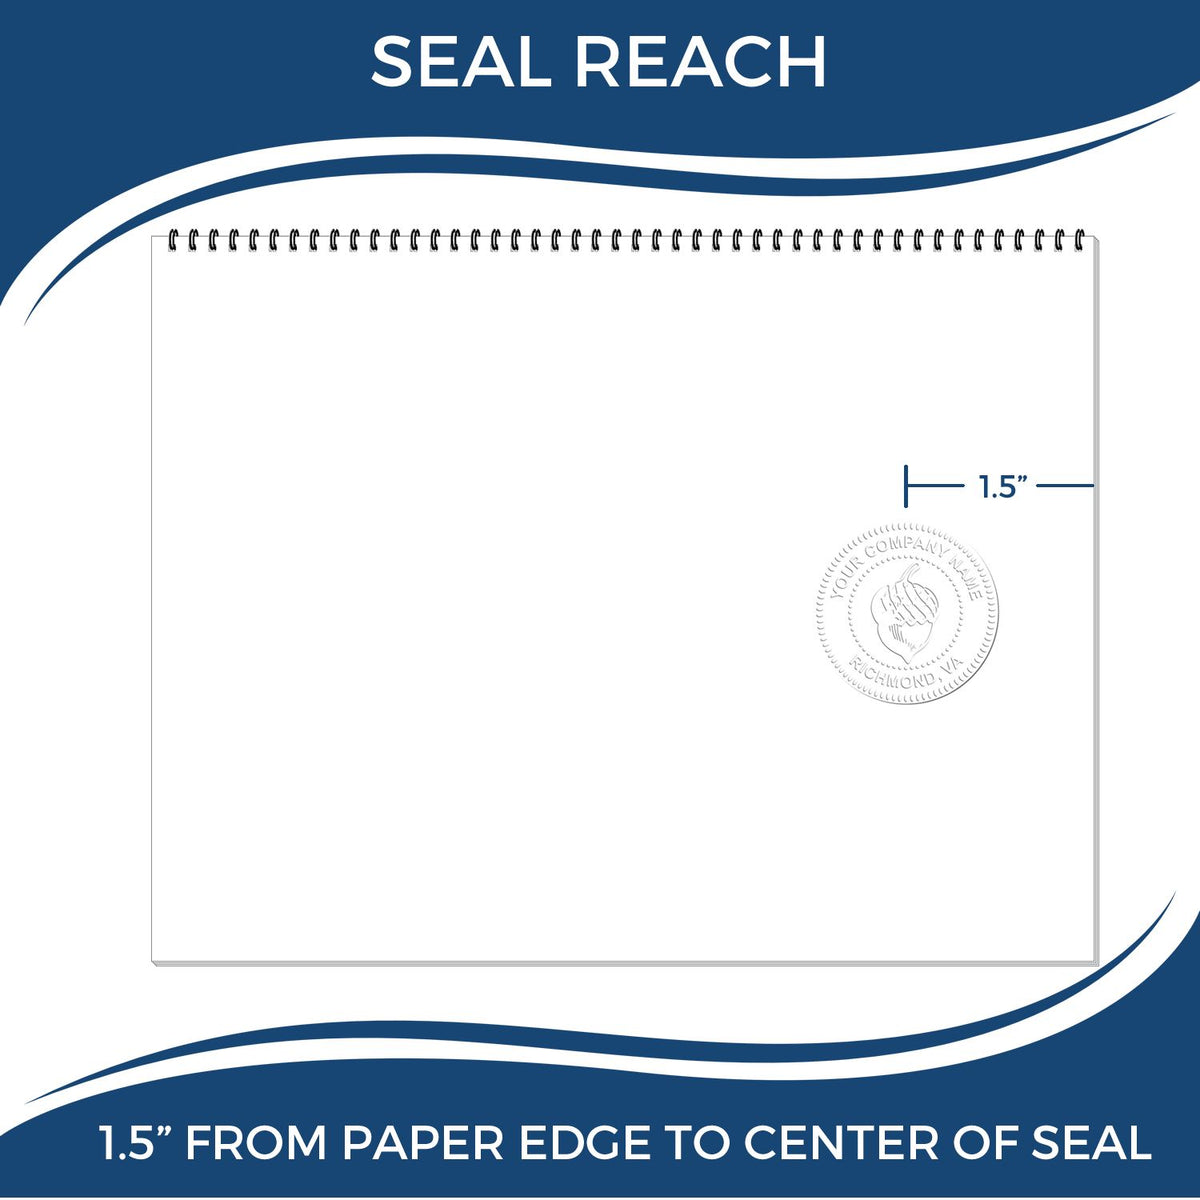 An infographic showing the seal reach which is represented by a ruler and a miniature seal image of the Handheld North Carolina Professional Engineer Embosser